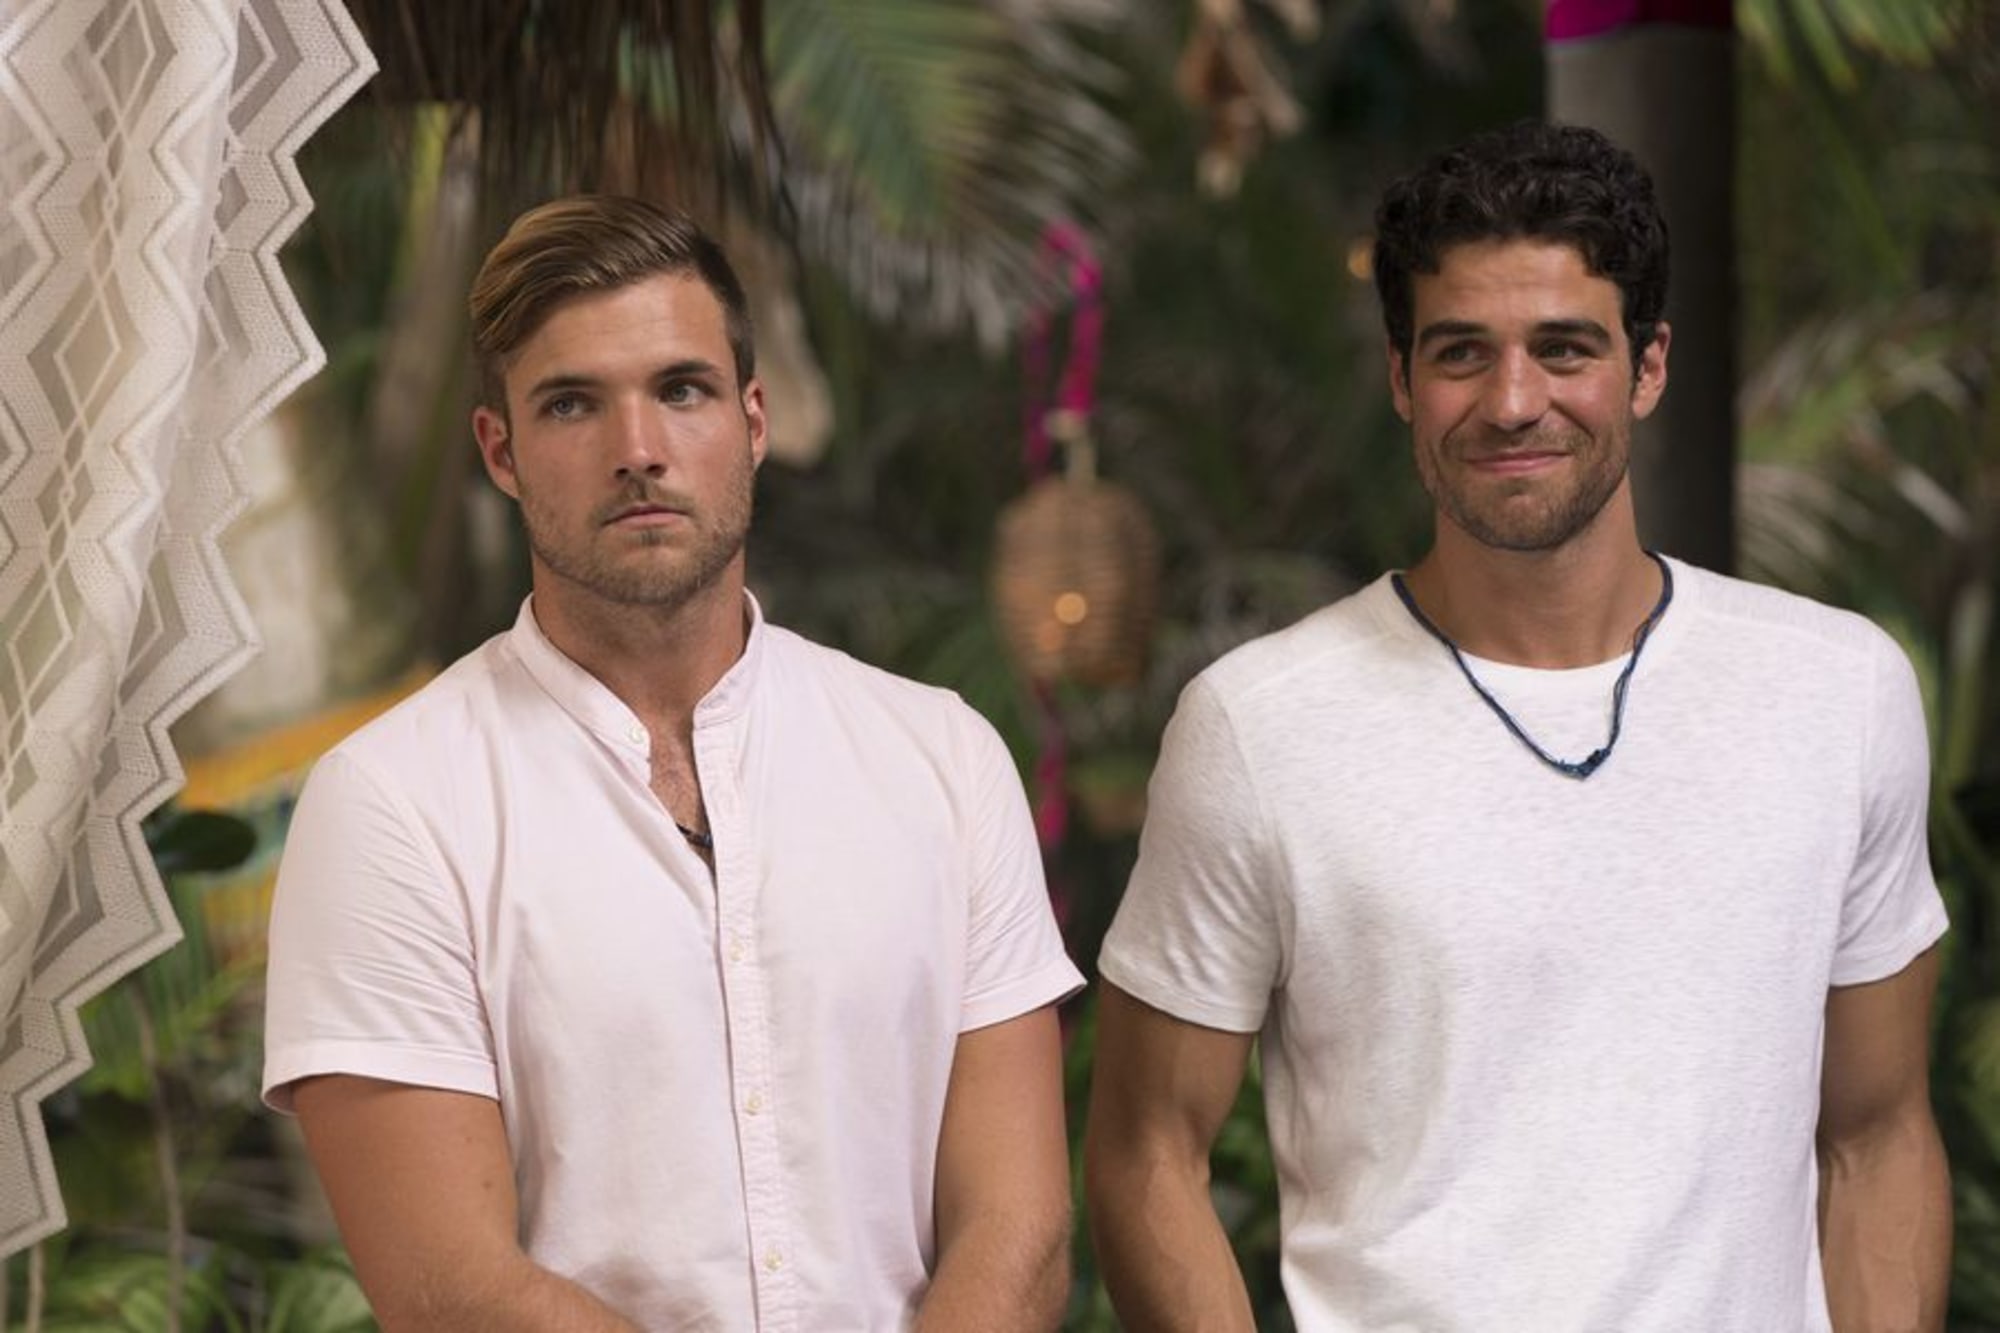 Watch Bachelor in Paradise premiere live streaming online, mobile